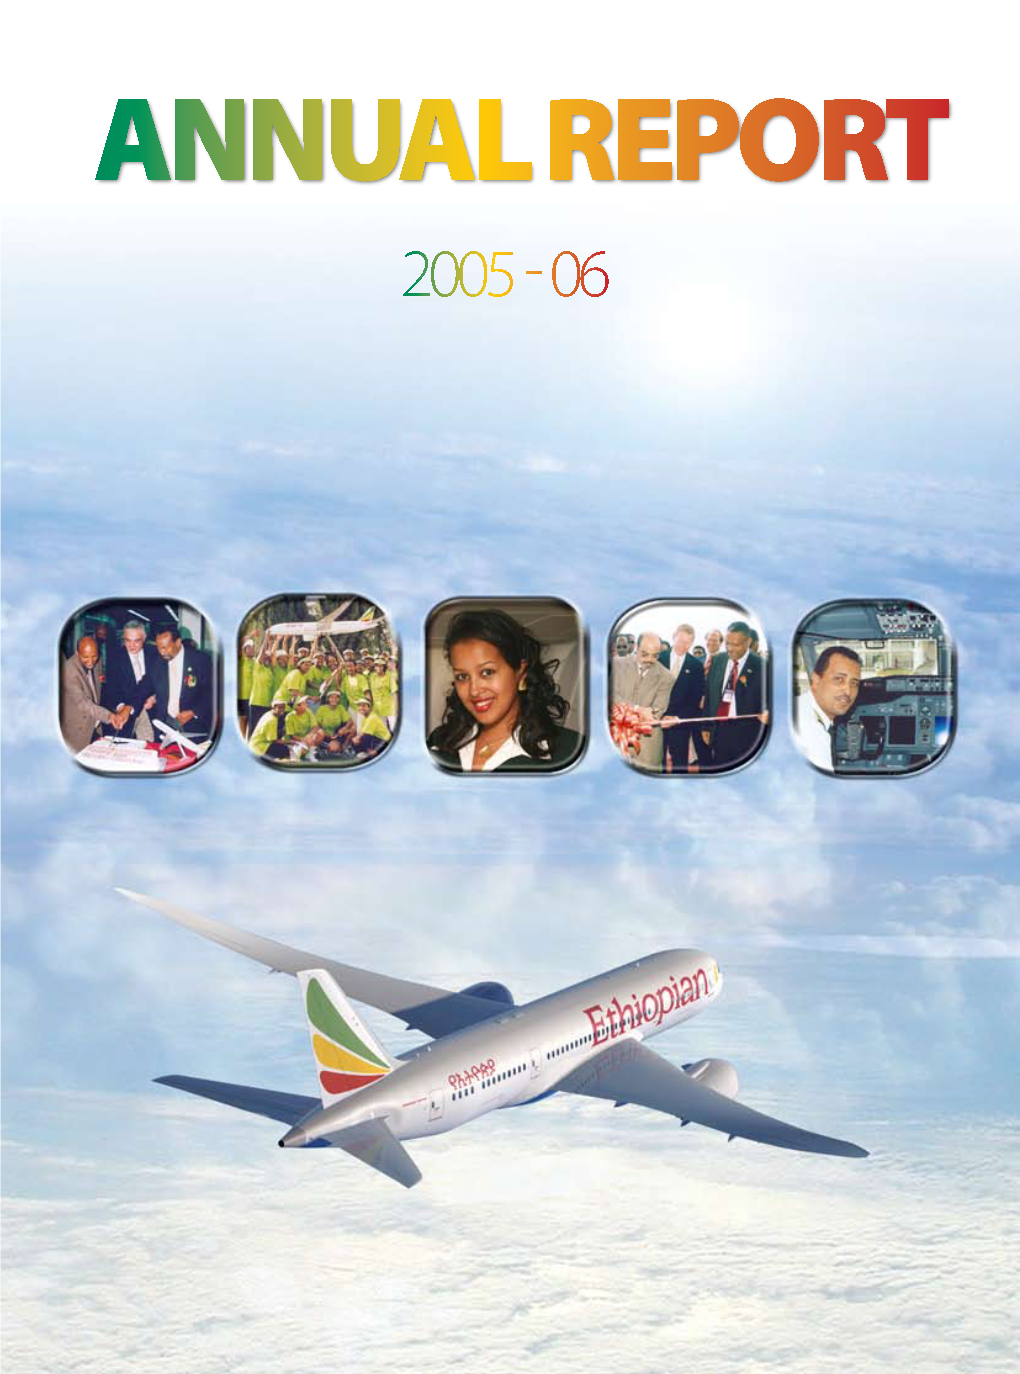 Download Annual Report 2005/06